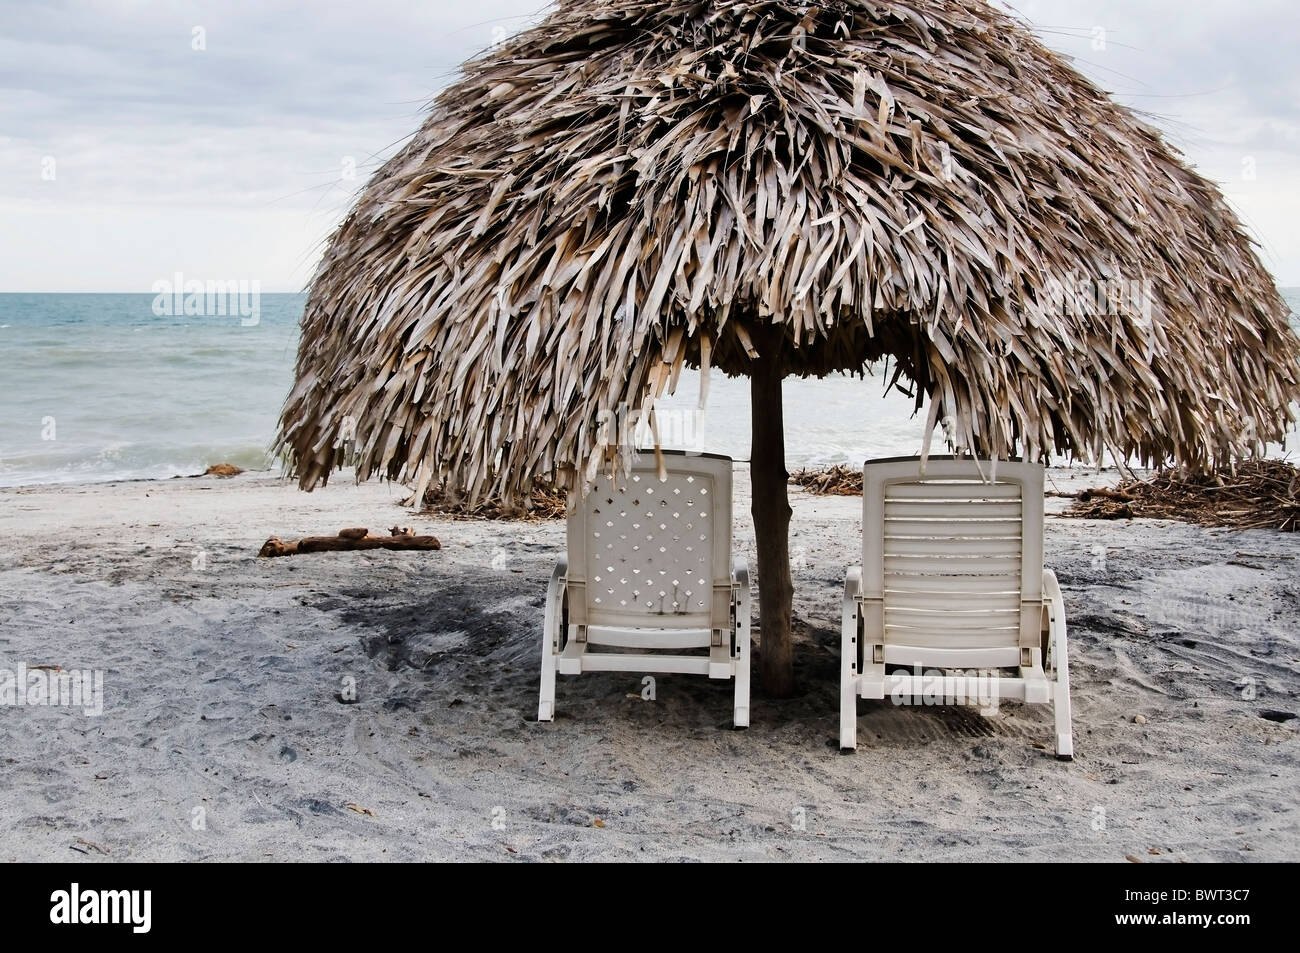 Two plastic chaise lounge chairs under a palapa structure offer shade and privacy on Panama's Playa Blanca. Stock Photo